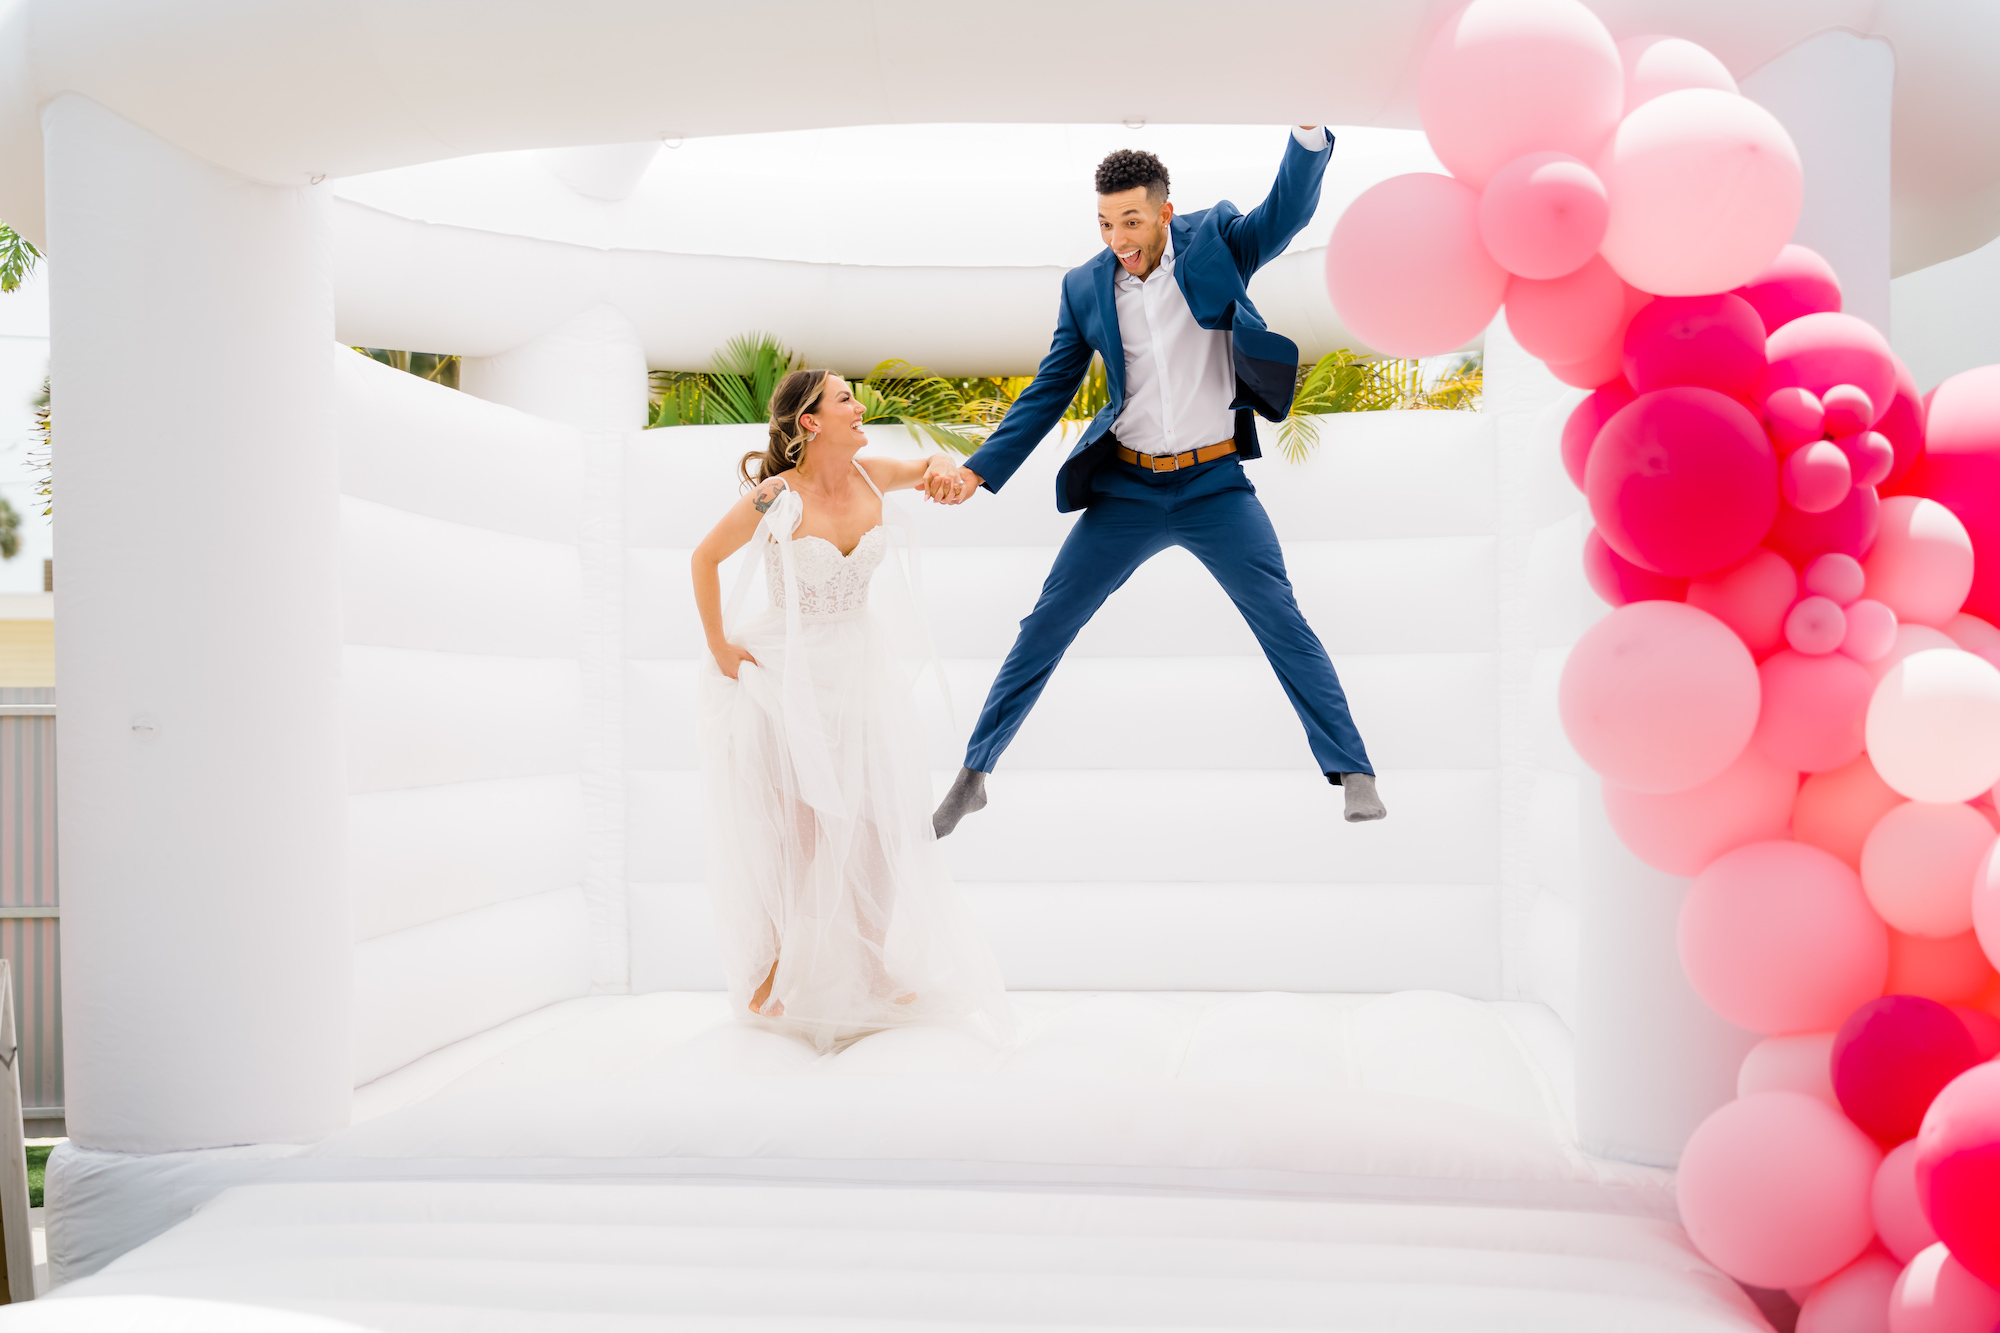 Whimsical Wedding Reception, White Bounce House with Pink Balloons